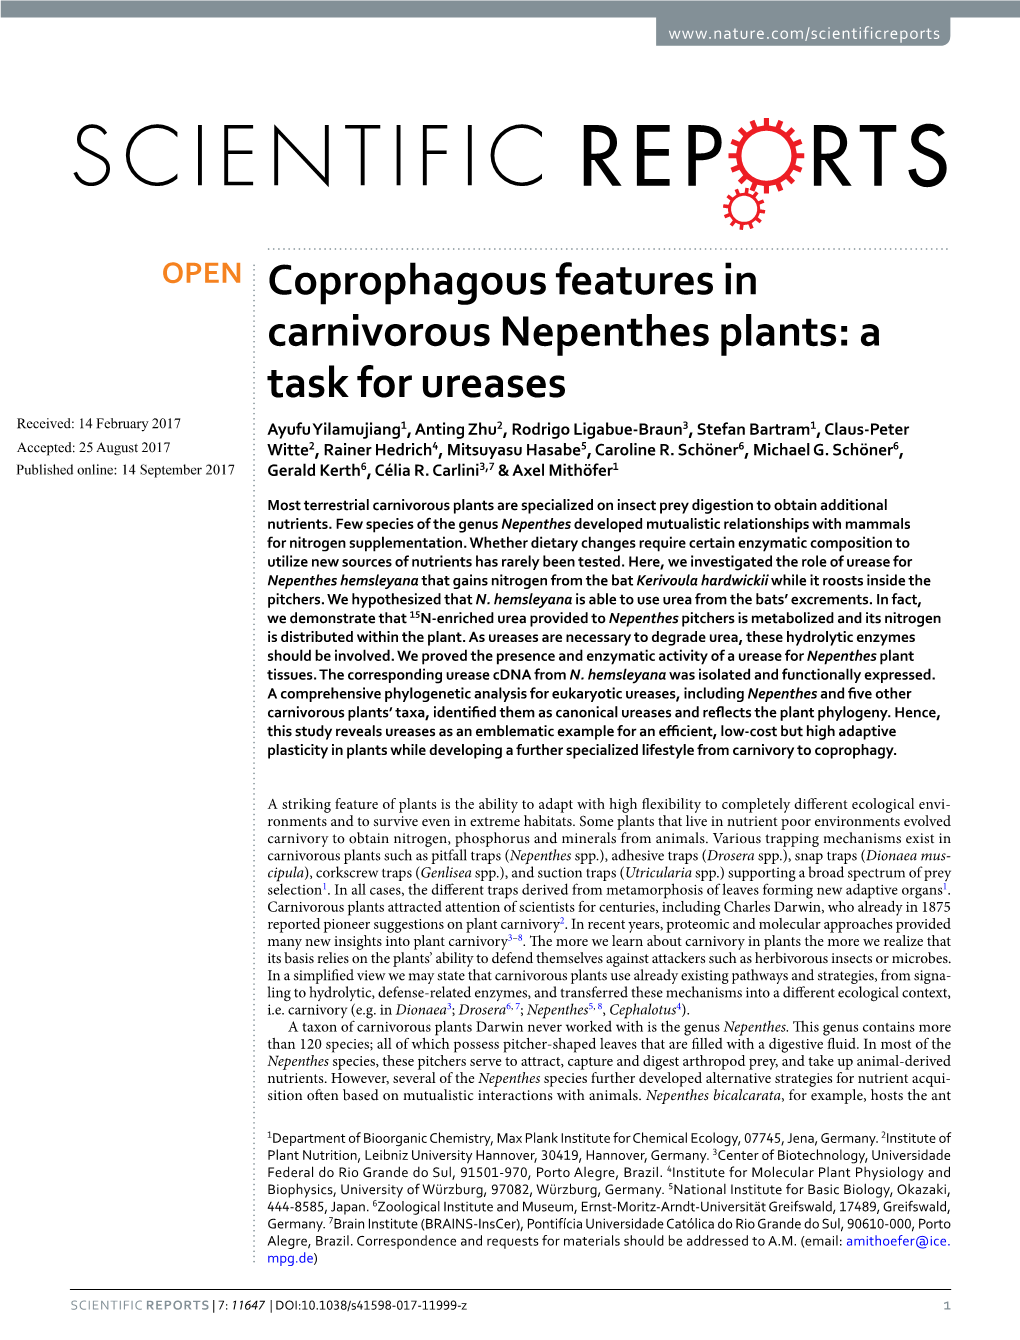 Coprophagous Features in Carnivorous Nepenthes Plants: a Task for Ureases